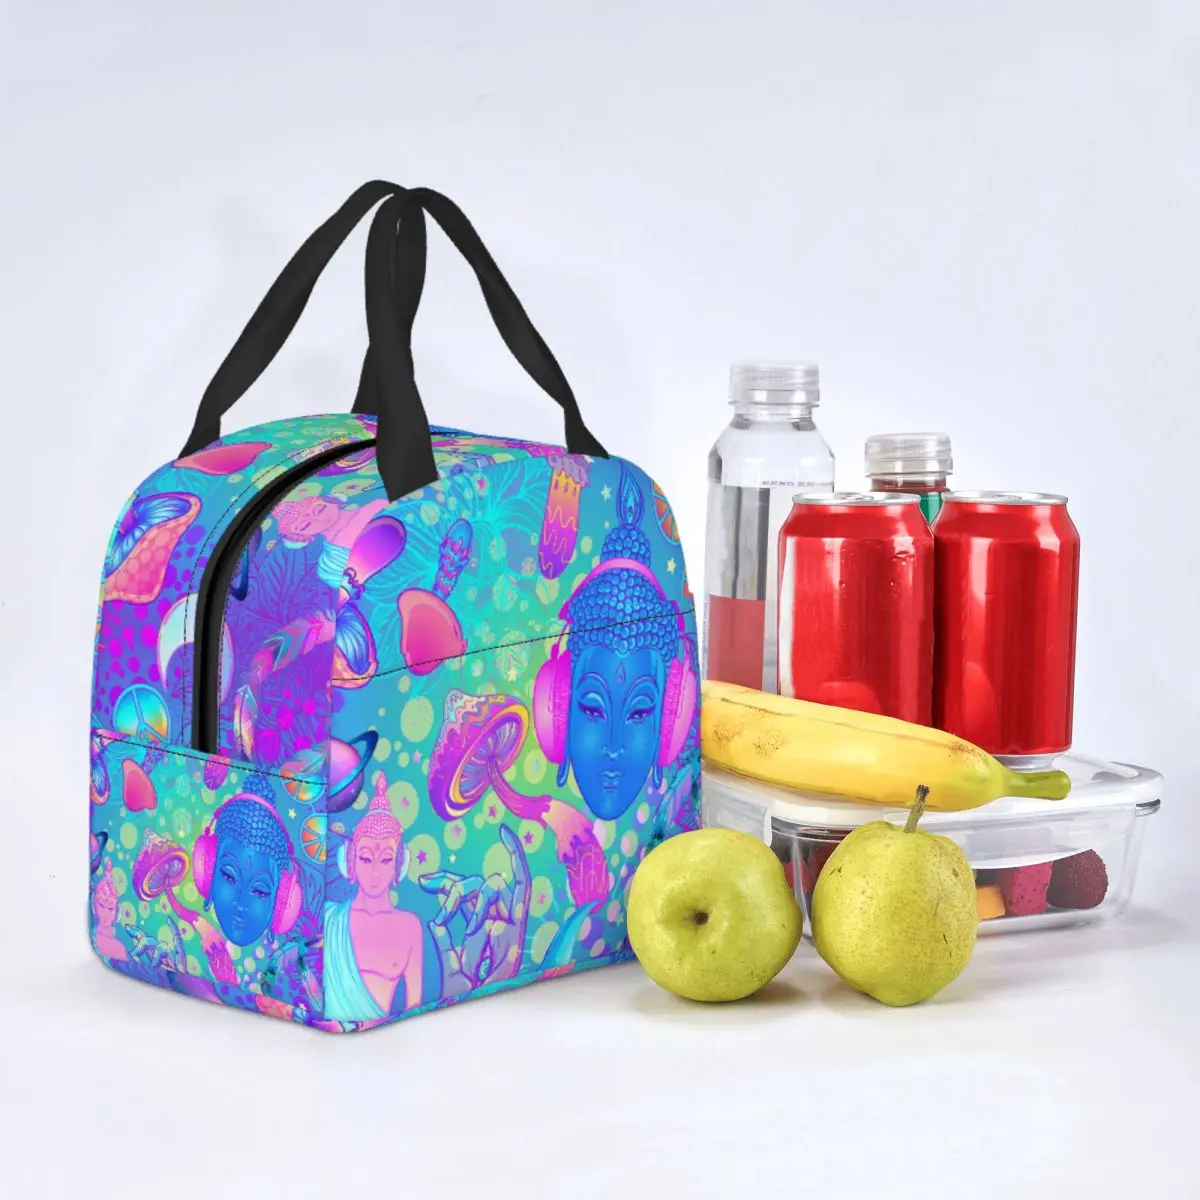 Buddha India Mandala Lunch Bag Portable Insulated Cooler Bag Mushroom Zen Thermal Cold Food Picnic Tote for Women Children